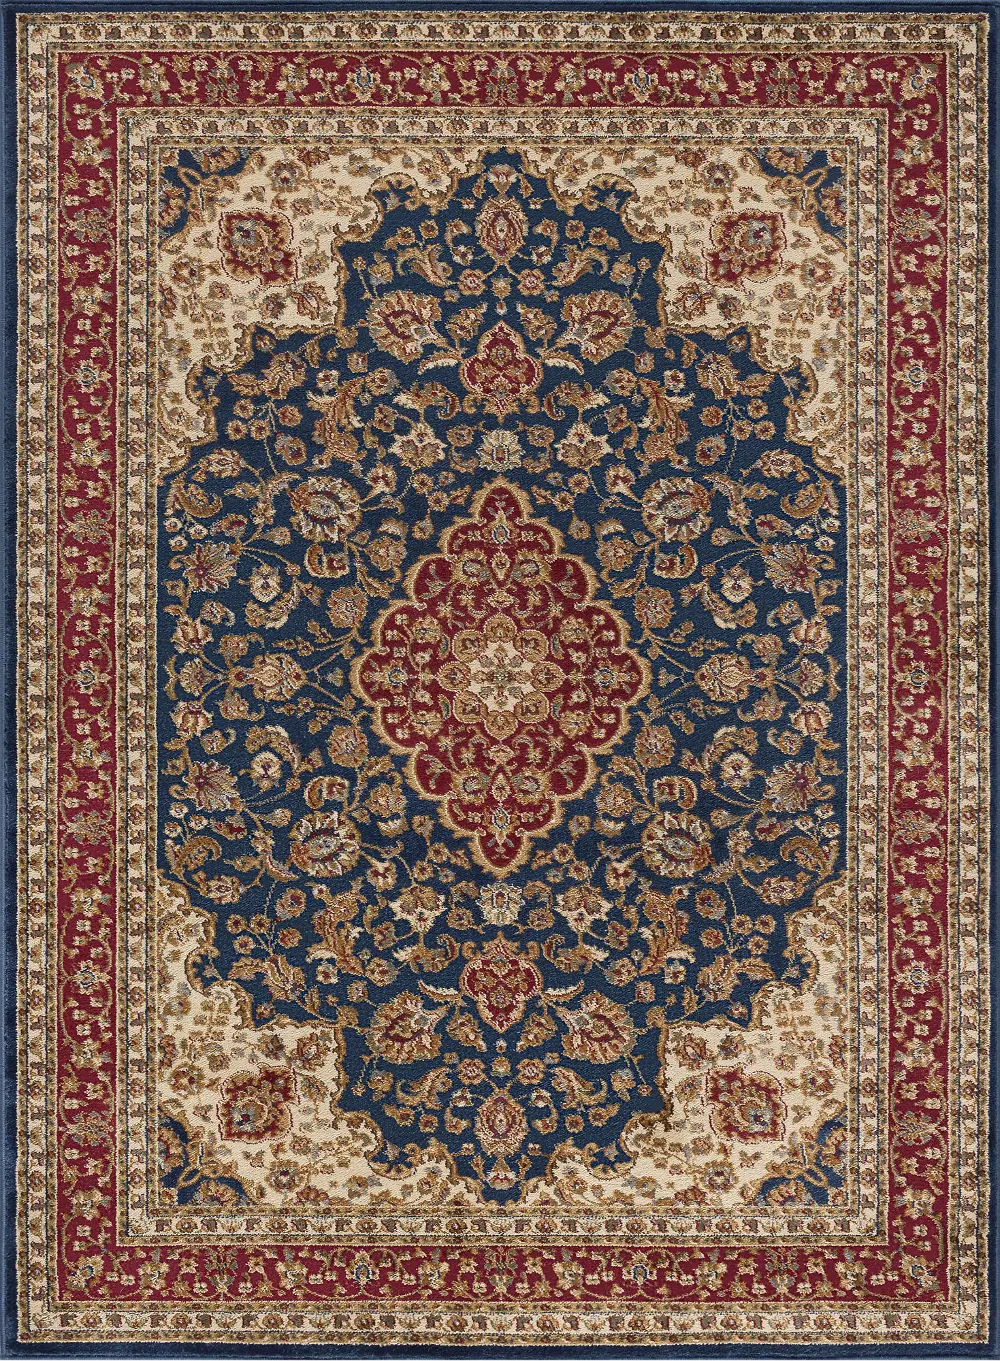 SNS47878x11 Sensation 8 x 11 Large Navy Blue and Red Area Rug-1